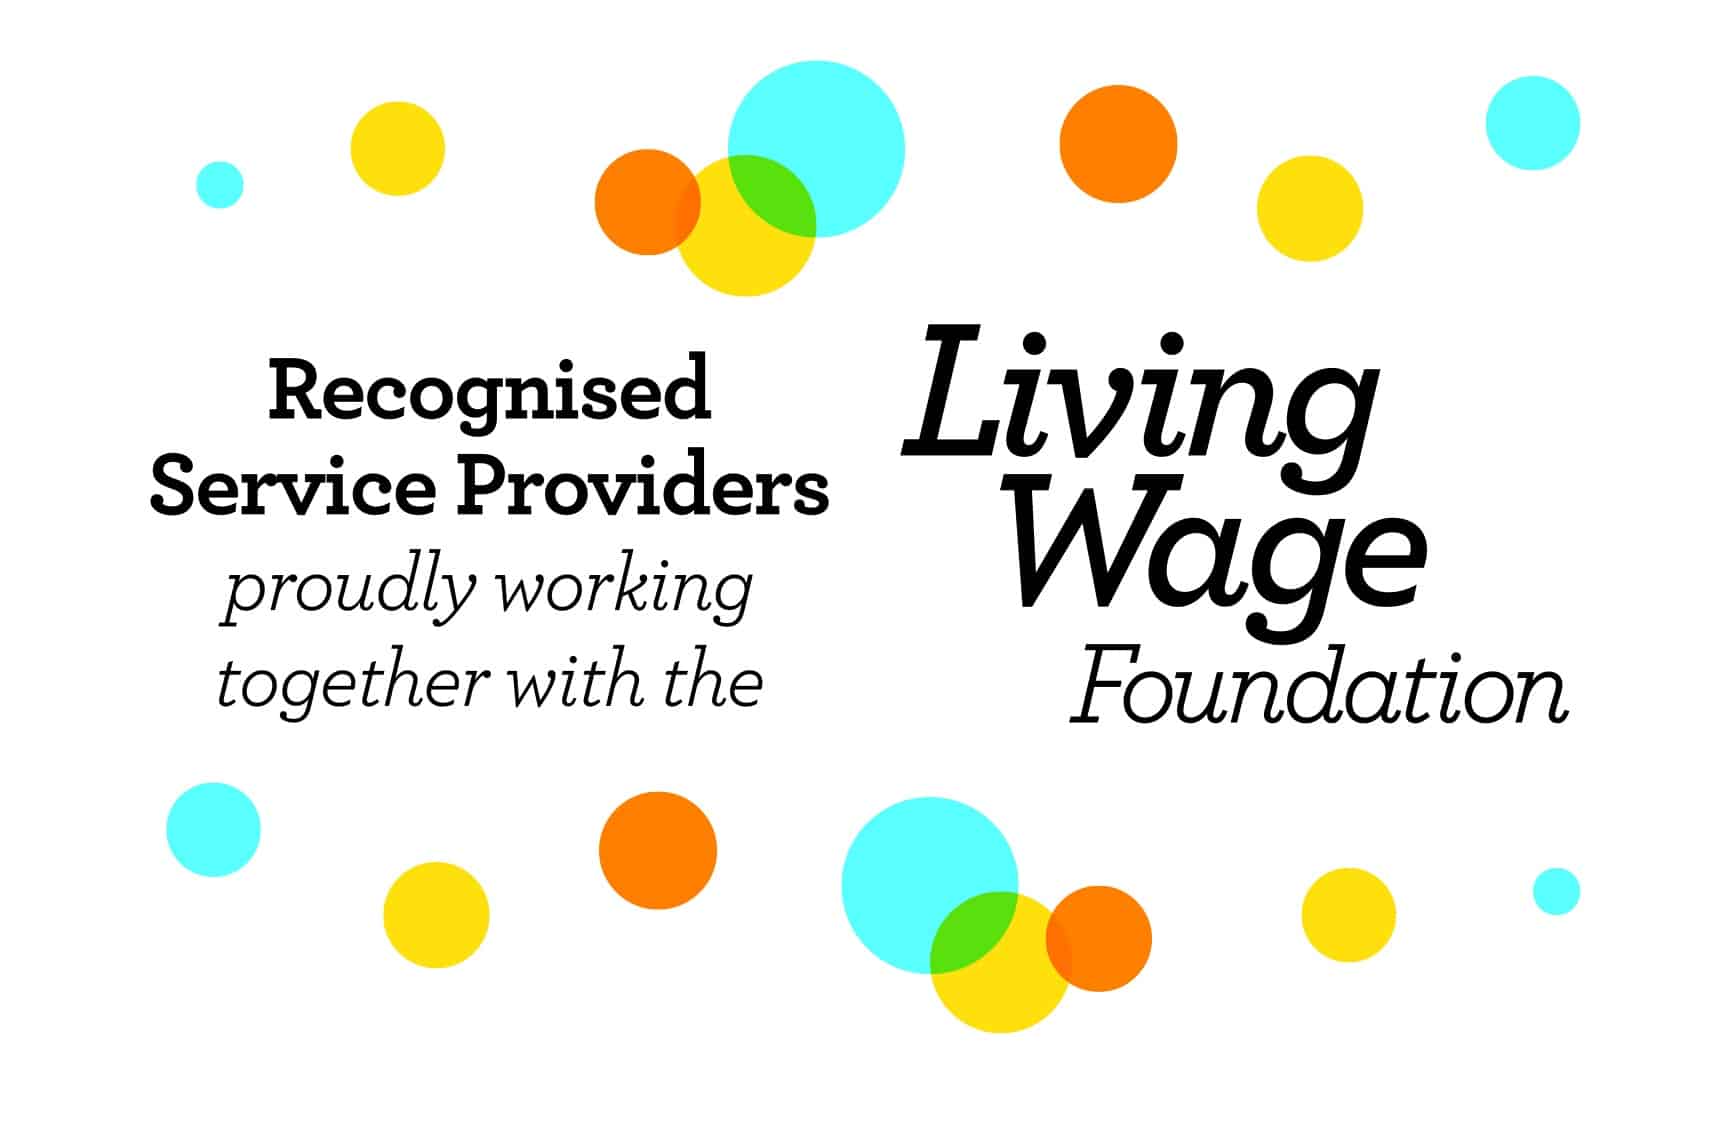 Recognised Service Providers proudly working together with the Living Wage FOundation